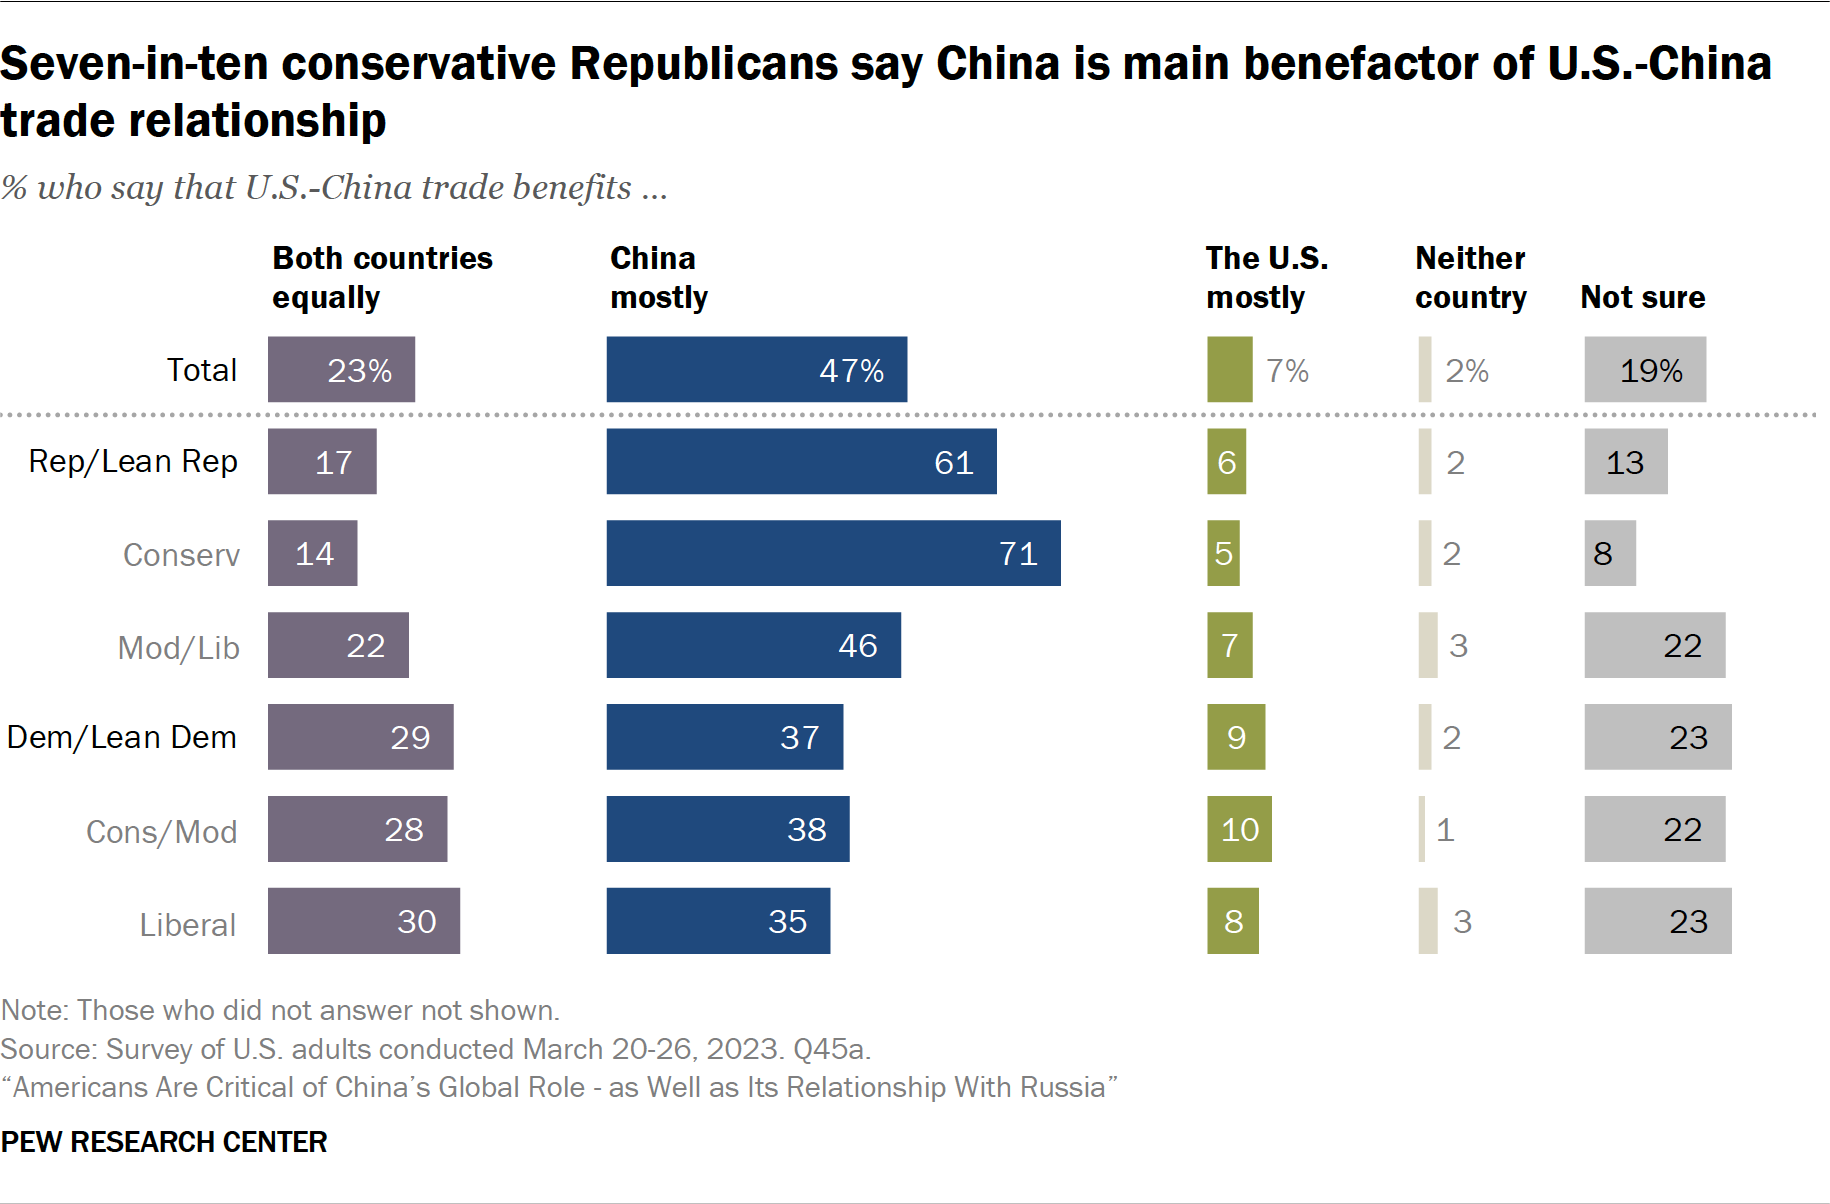 Seven-in-ten conservative Republicans say China is main benefactor of U.S.-China trade relationship